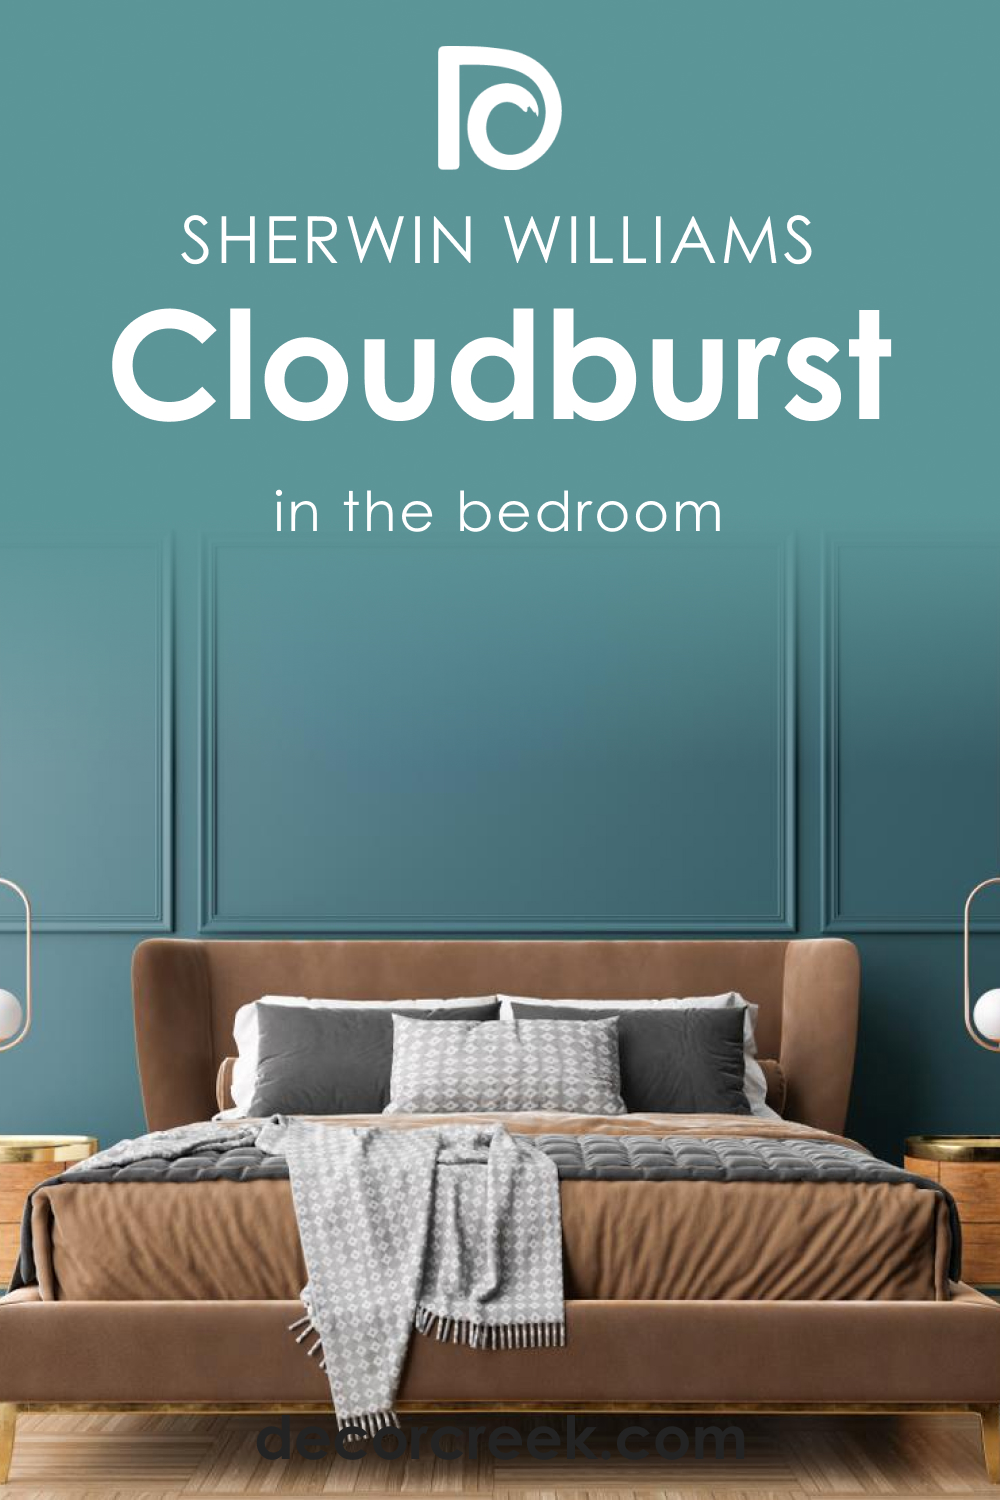 How to Use SW 6487 Cloudburst in the Bedroom?